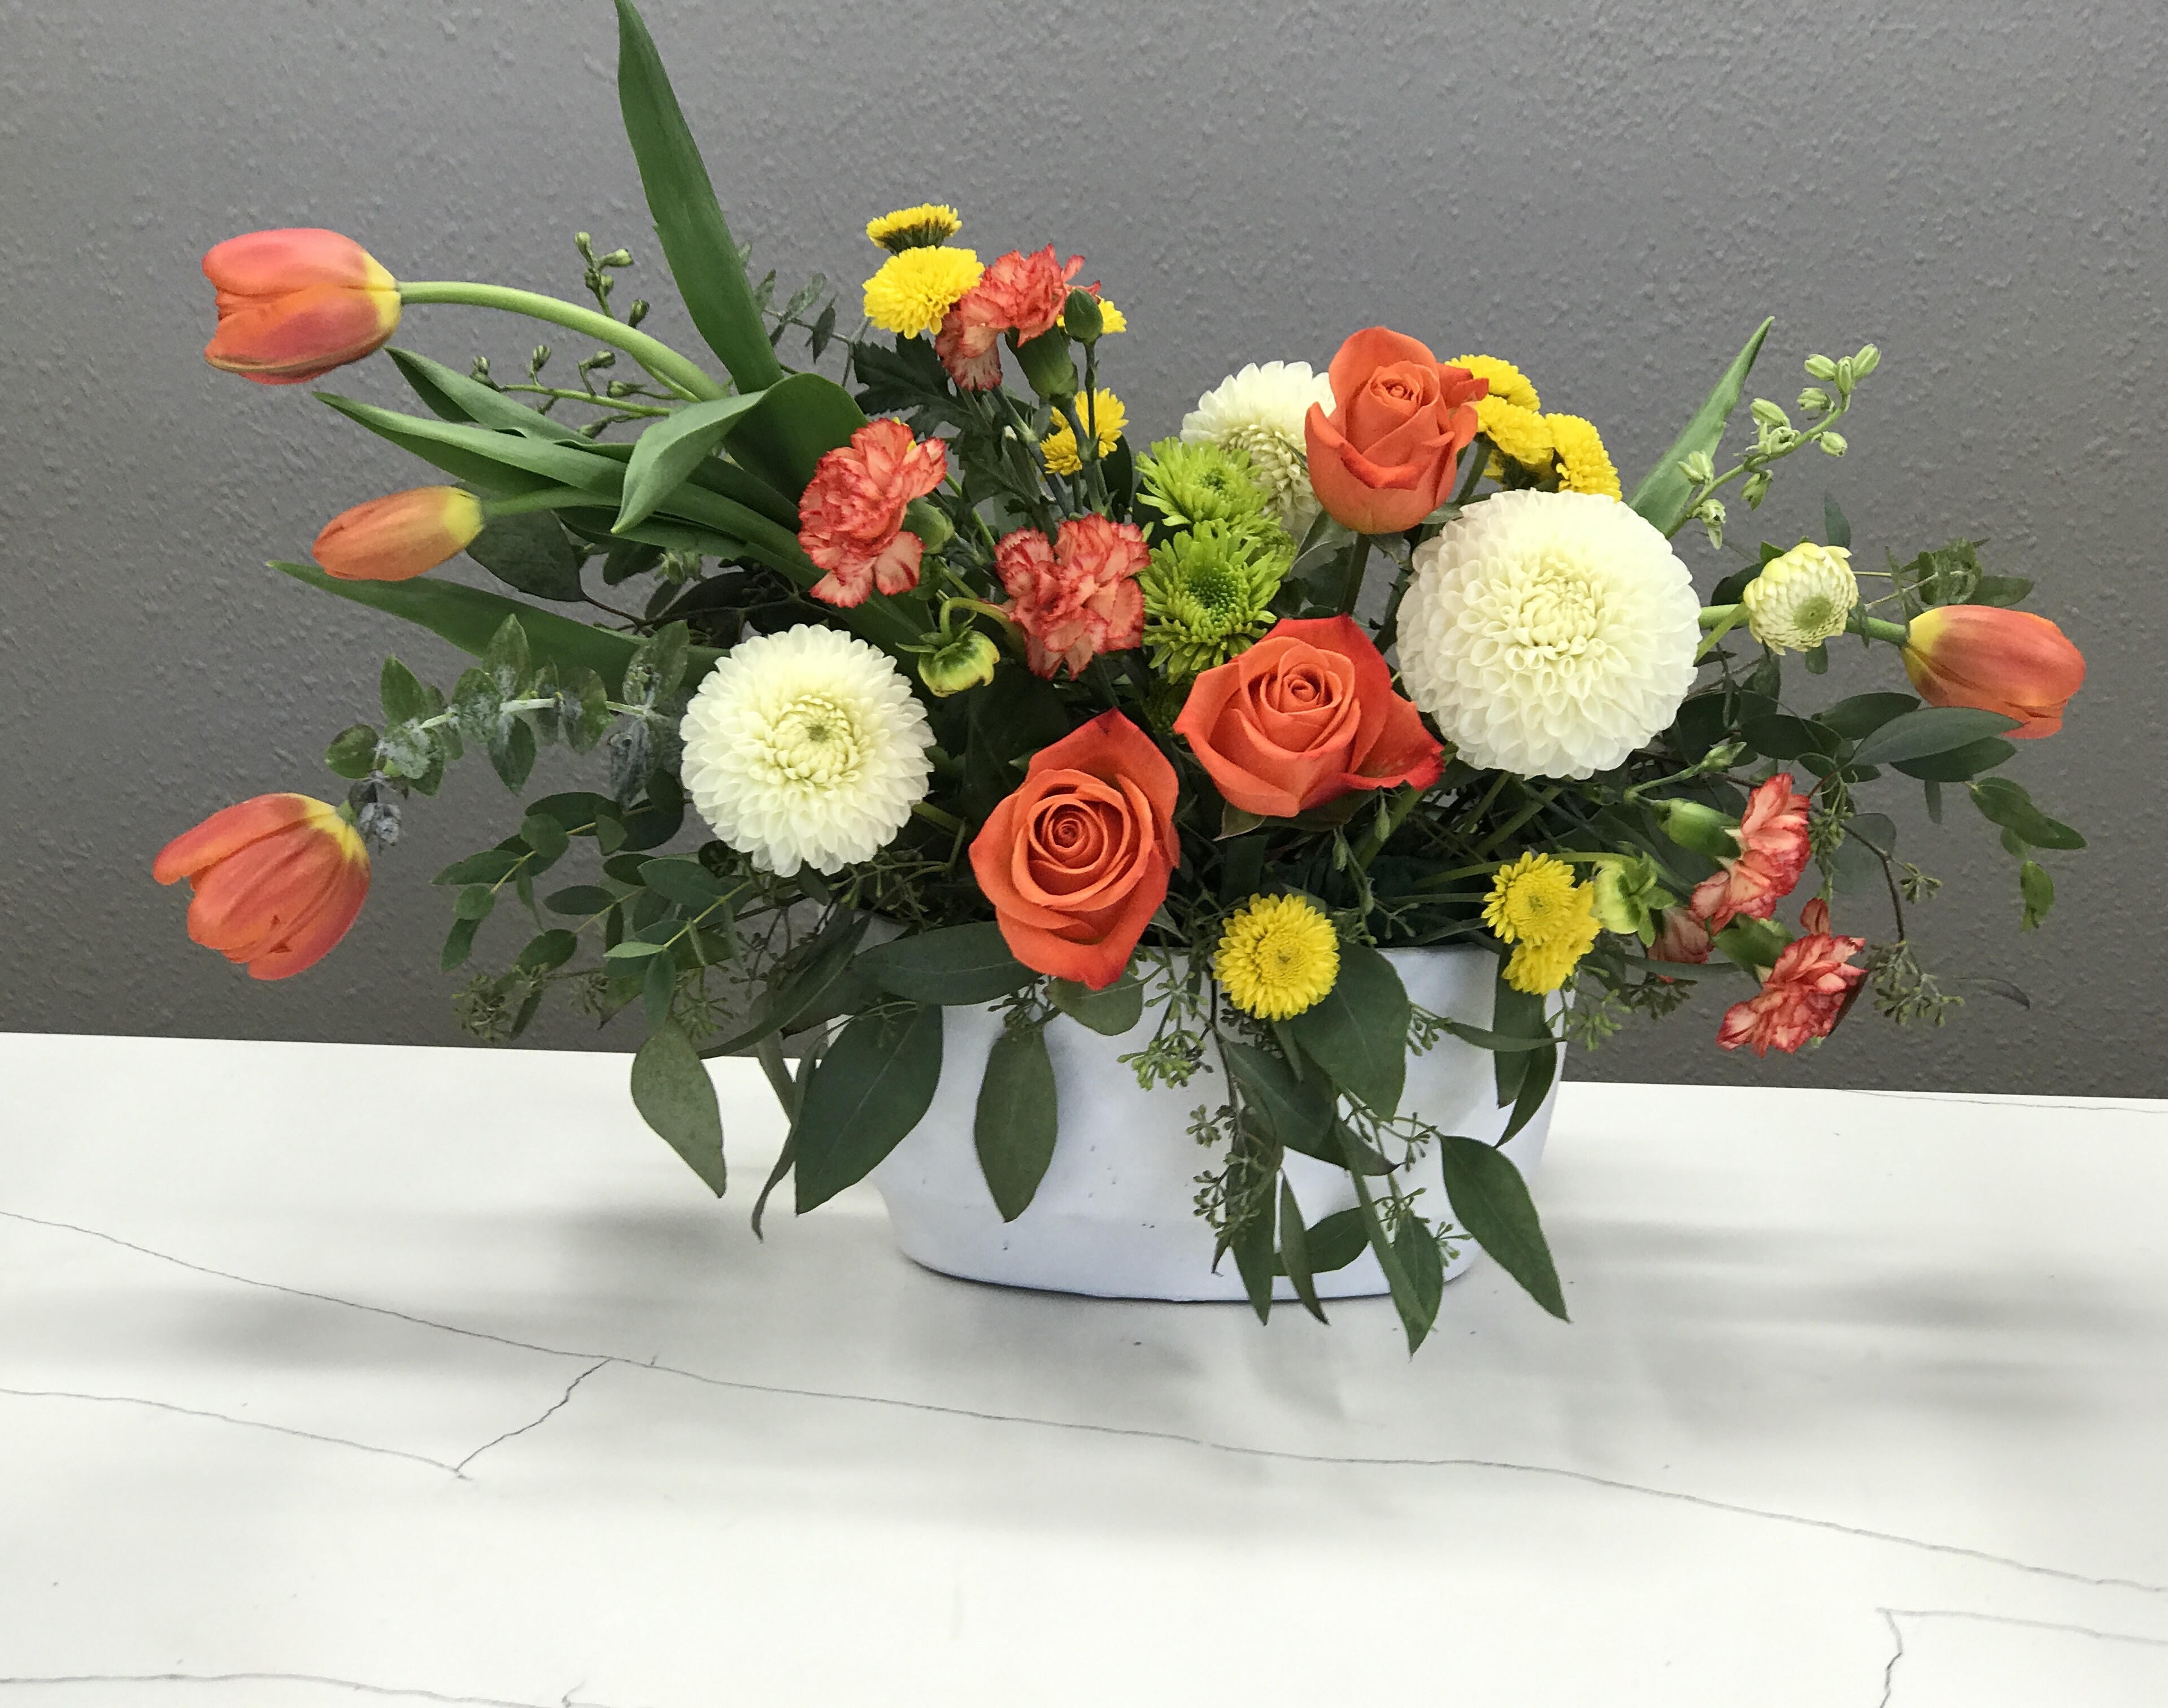 Tangerine Dreams  - Tangerine roses and tulips celebrated by bursts of white dahlias and green and yellow buds. 